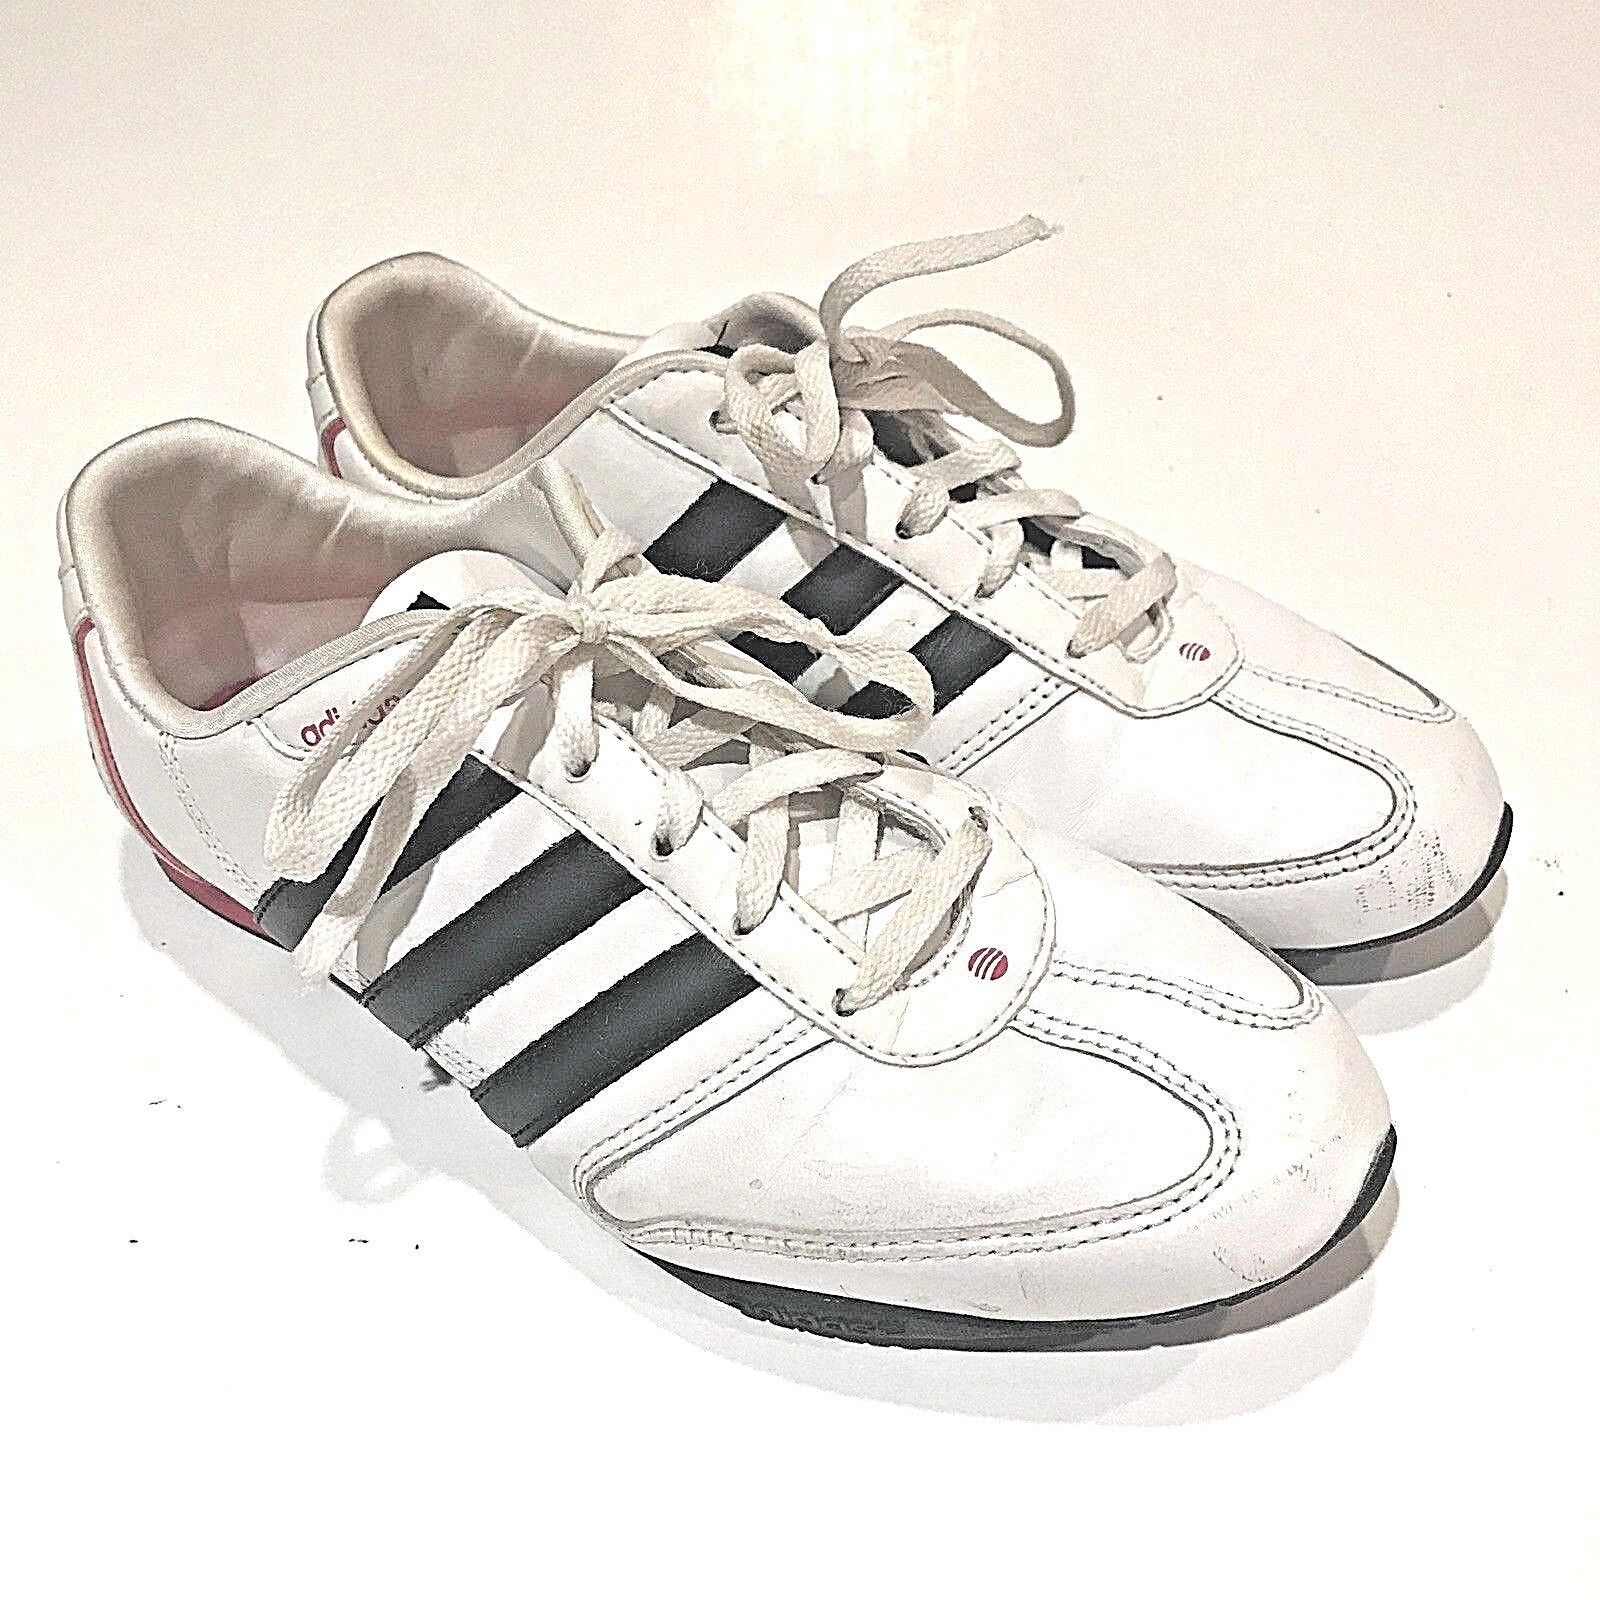 Adidas Womens Sneakers Vibetouch Pink Striped Lace Up 7 eBay